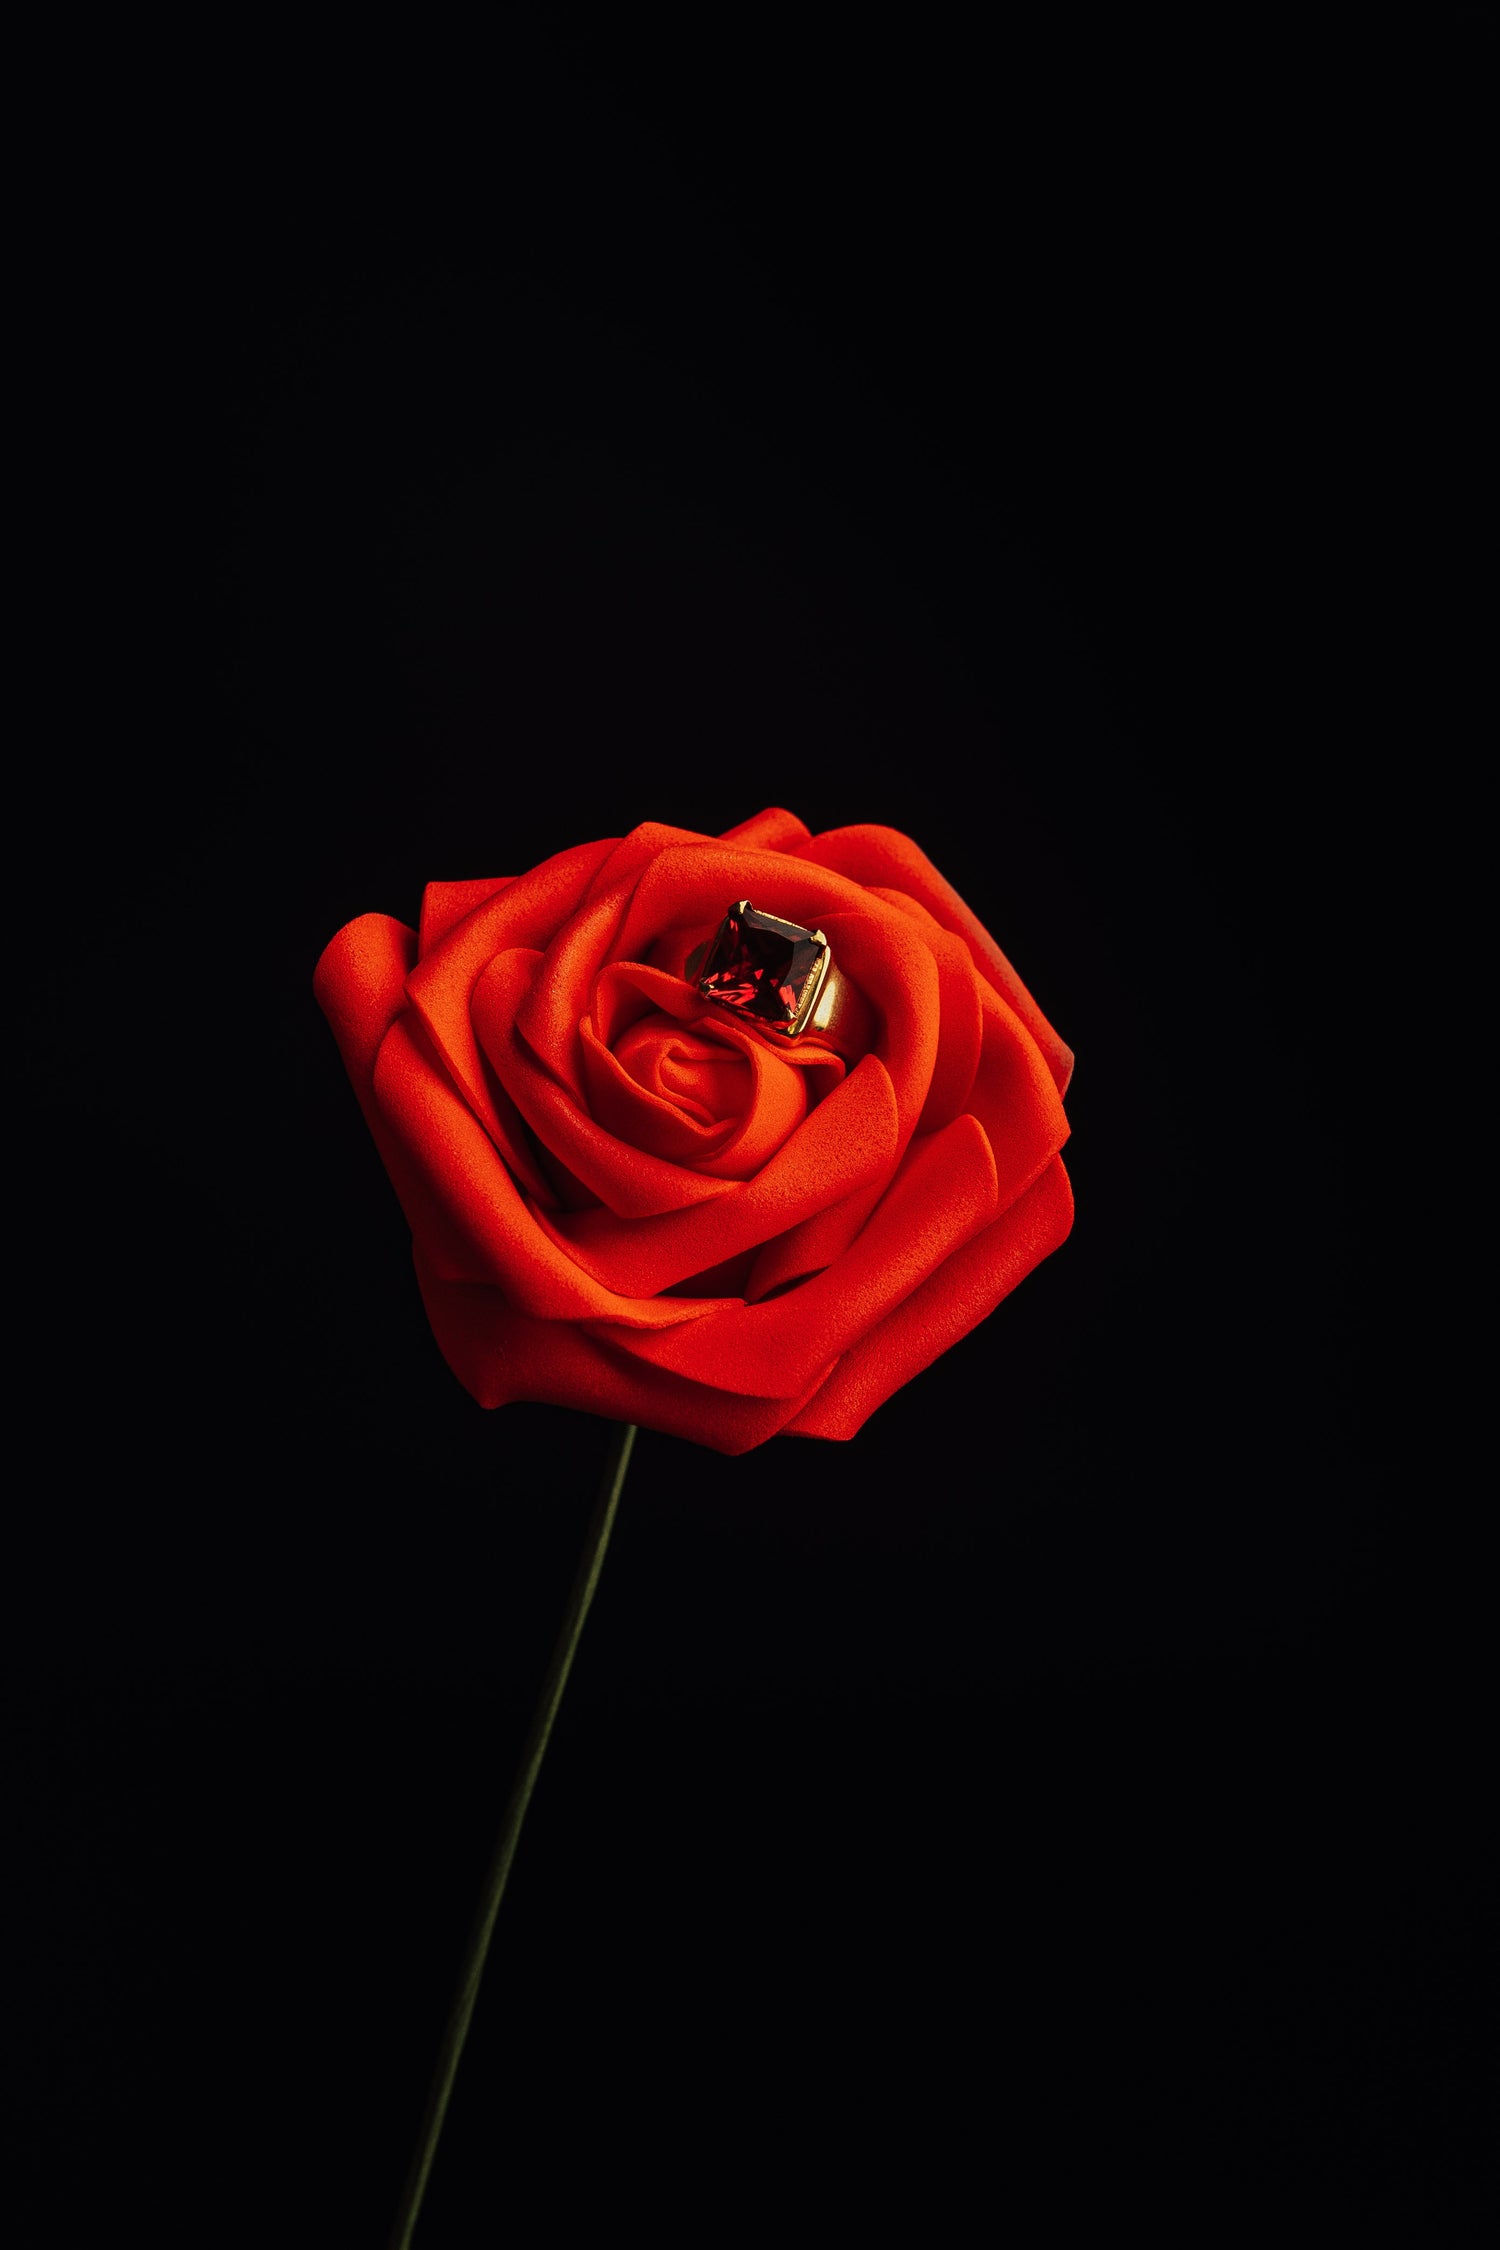 A Ruby ring on a Rose